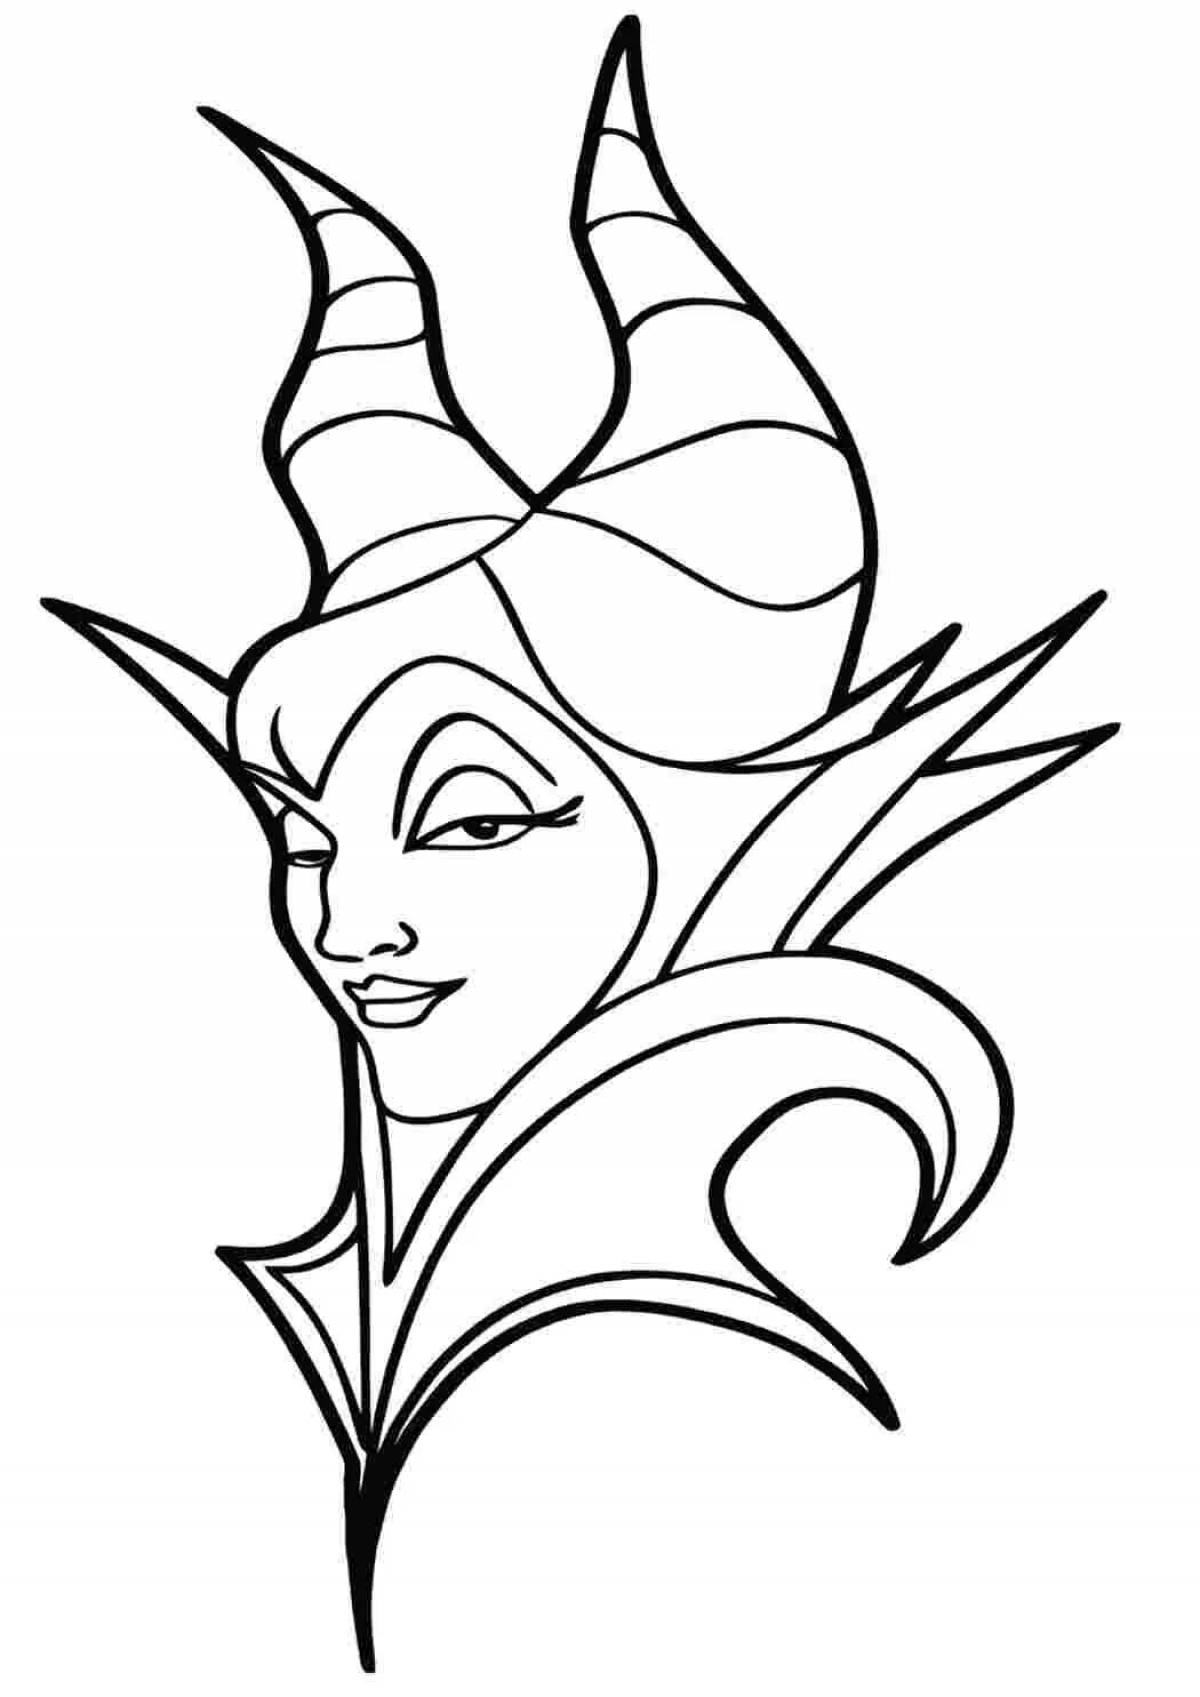 Maleficent for kids #3